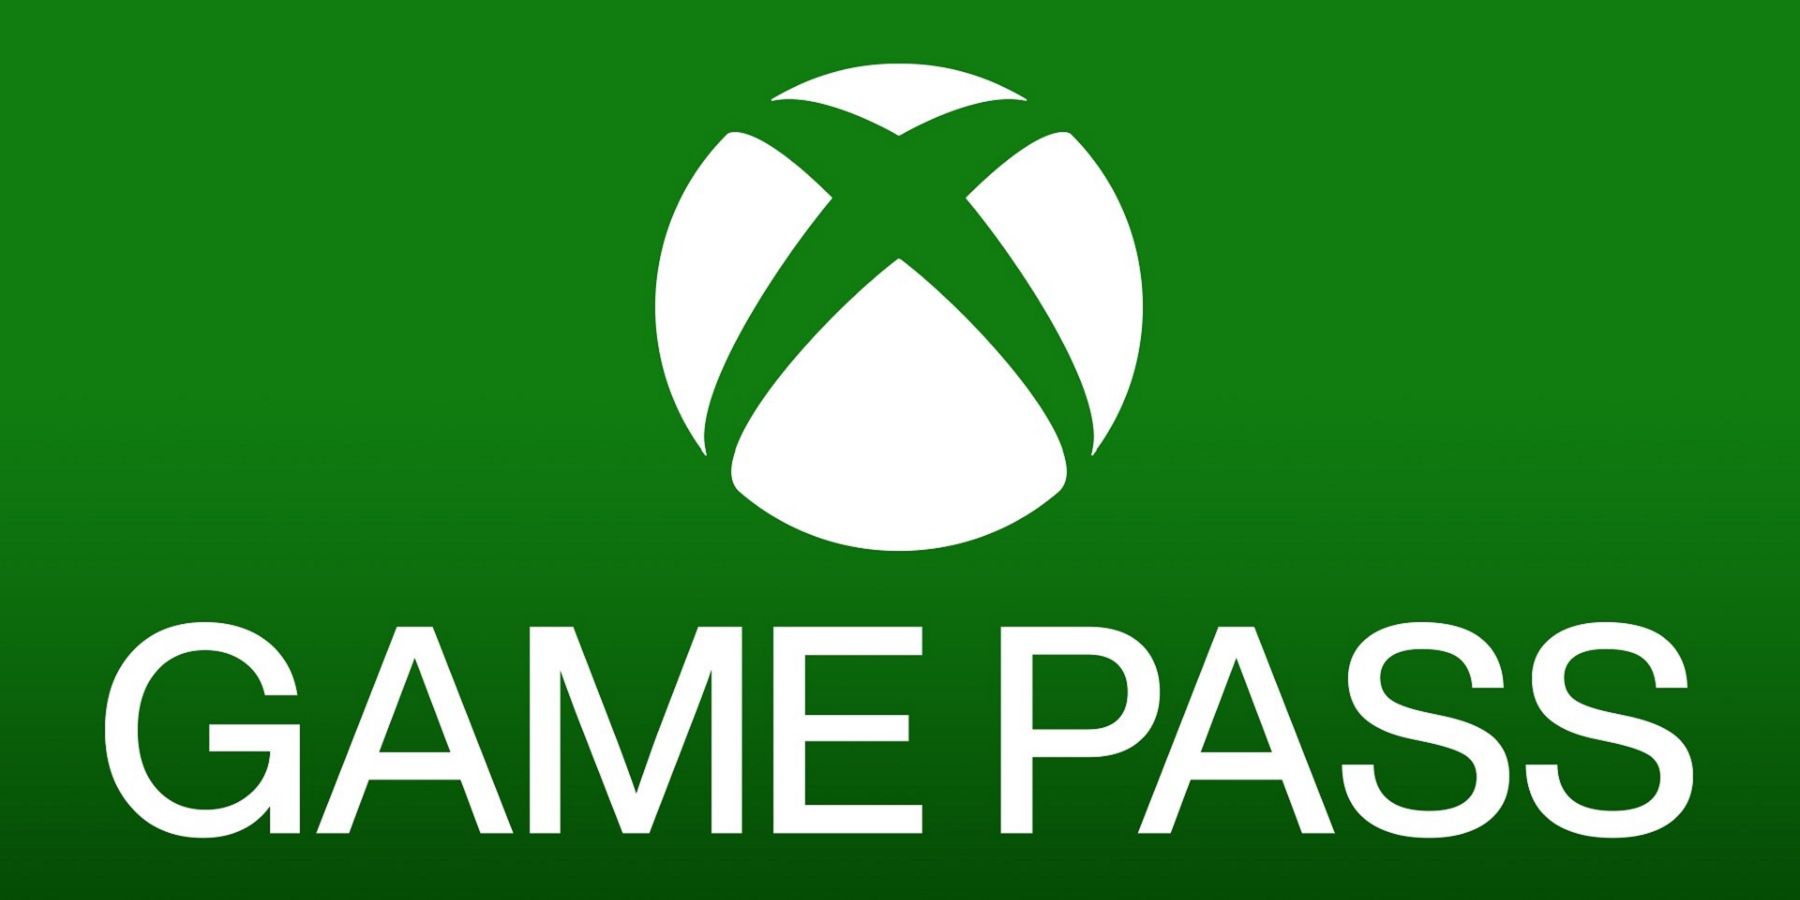 Xbox Game Pass Confirms 9 More Games for March, Including 5 Day One Releases